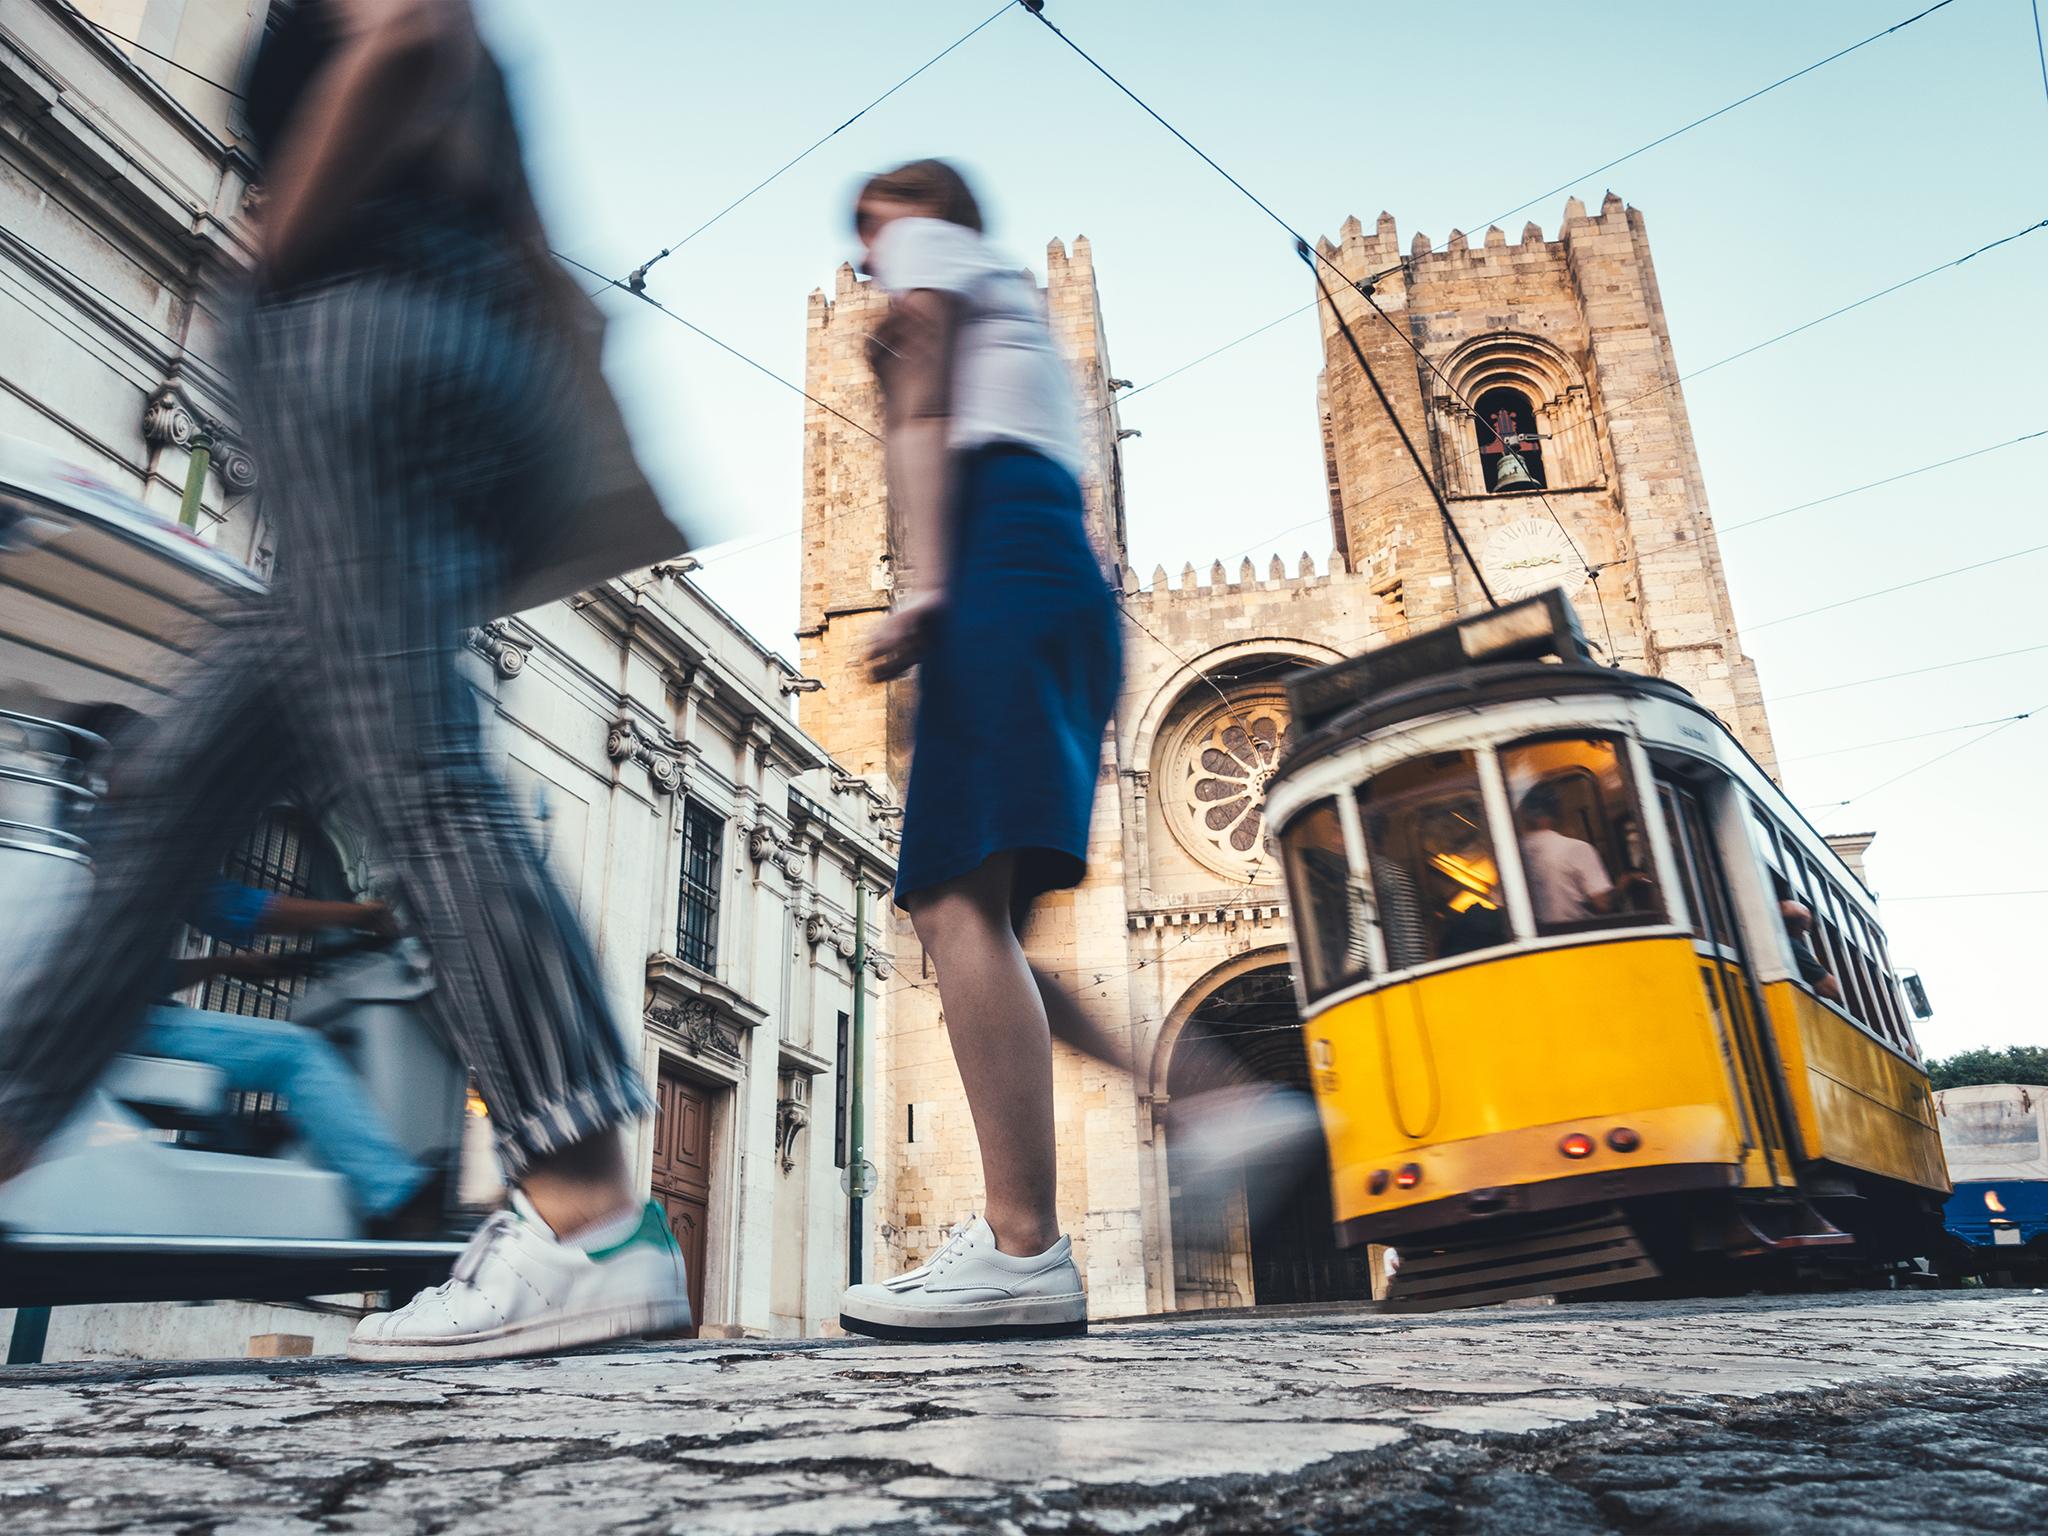 Vintage trams and pretty cobbled streets: Lisbon has it all (Getty)